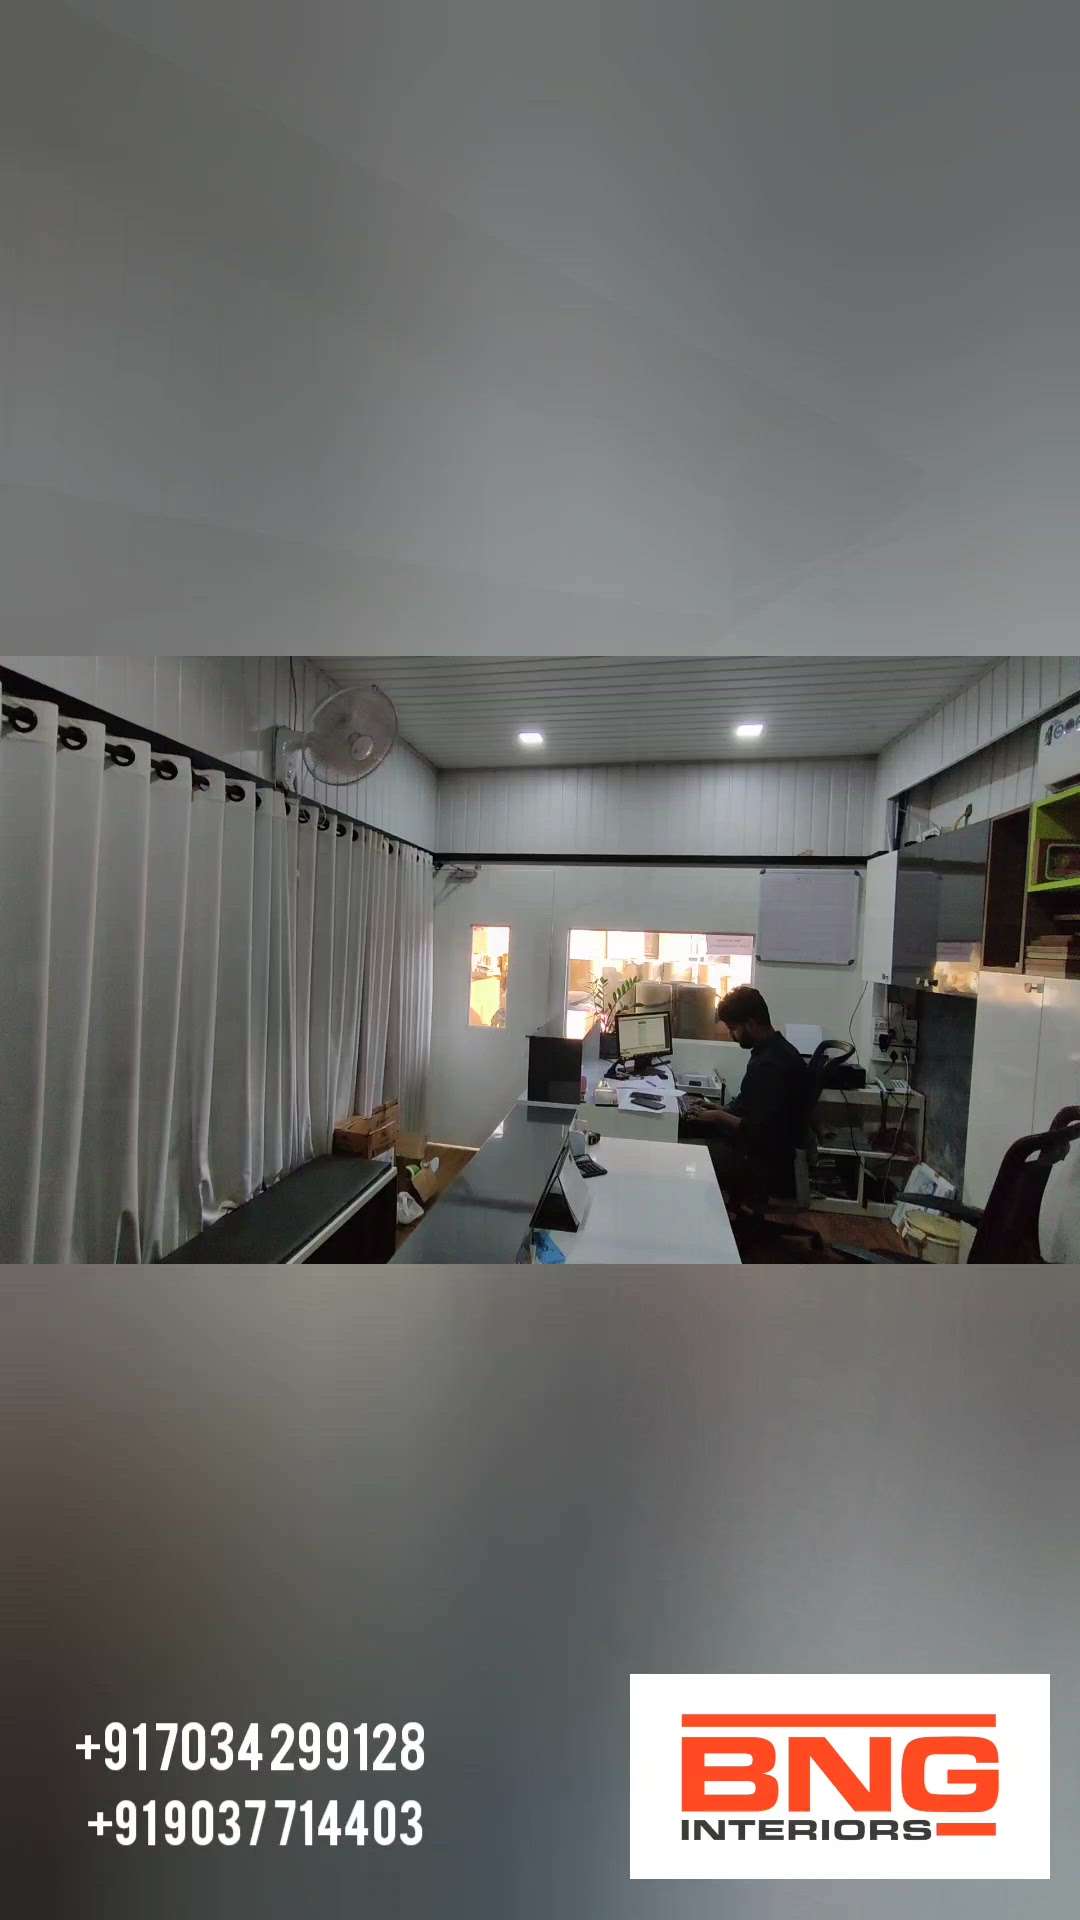 Bng interiors Manufacturing unit